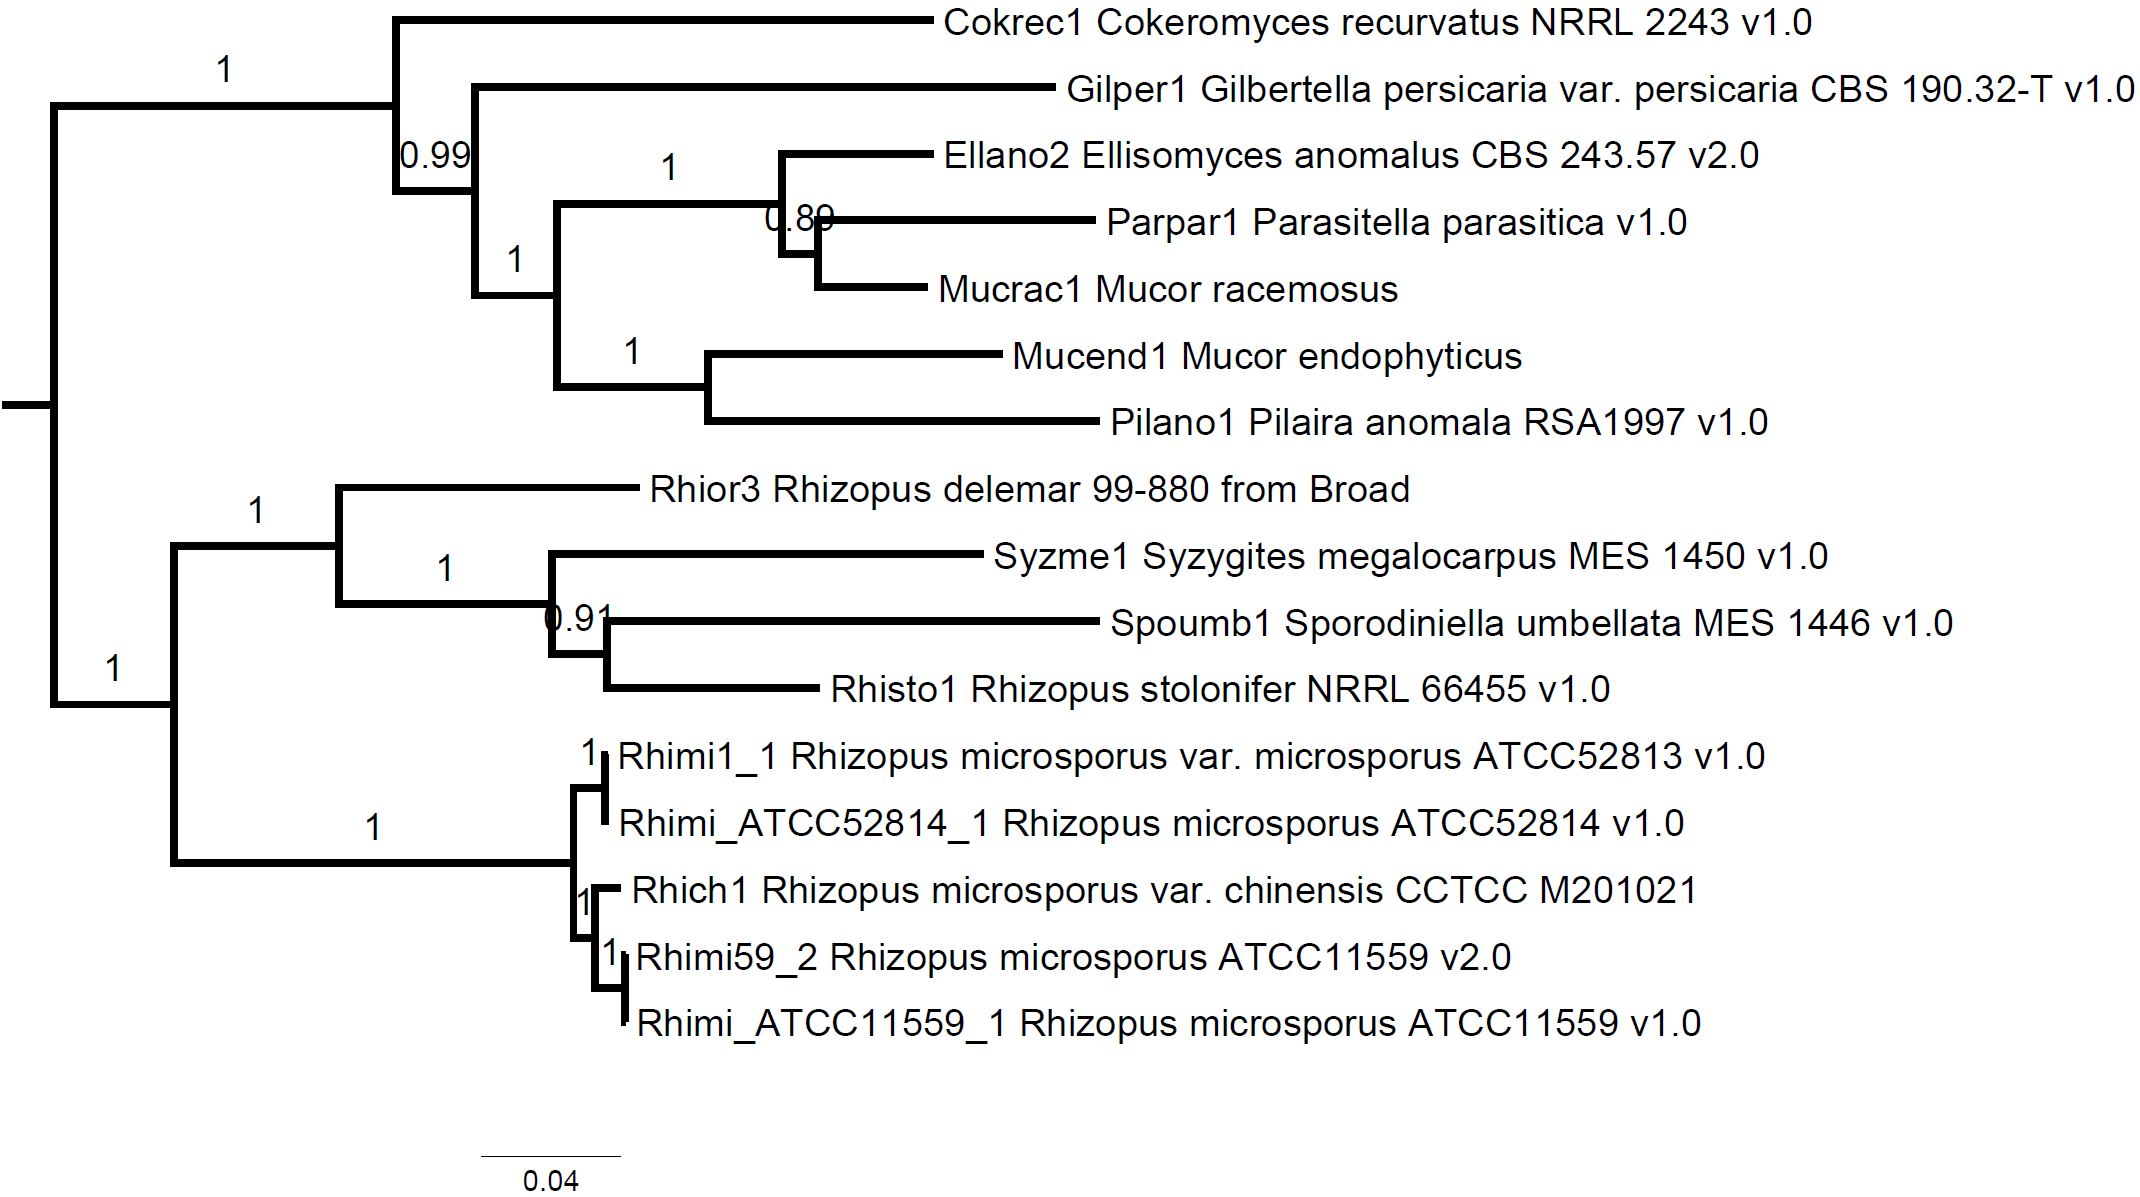 Maximum likelihood phylogeny, generated using FastTree, showing phylogenetic relationship between Syzygites megalocarpus MES 1450 and related species.